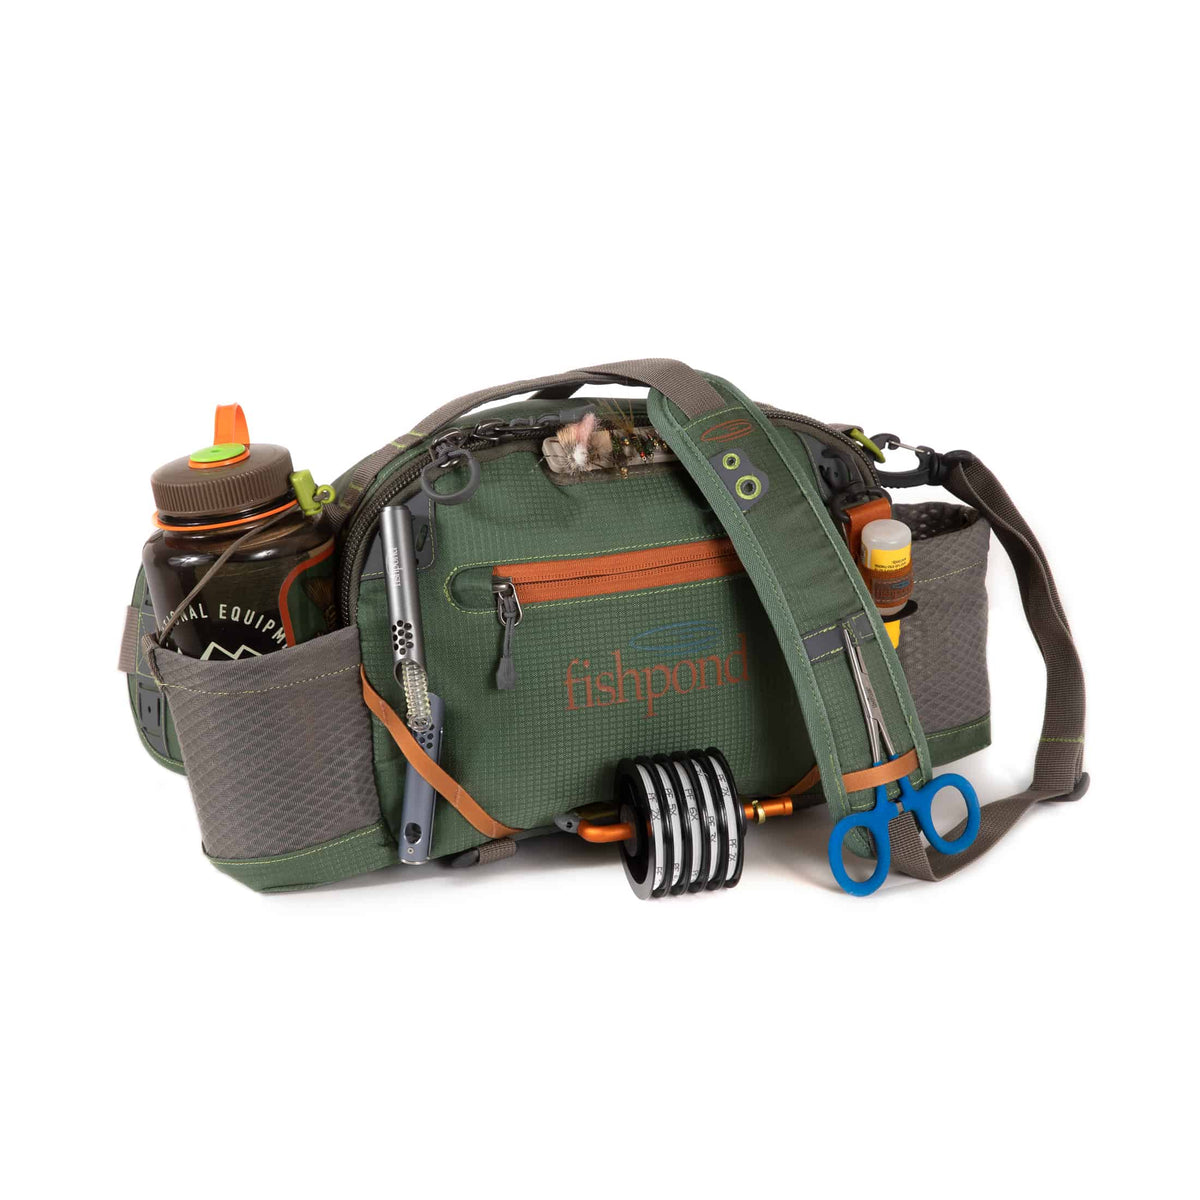 816332015700 EHLP-T Fishpond Elkhorn Lumbar Pack Tortuga New Fishpond Waist Pack Front With Accessories